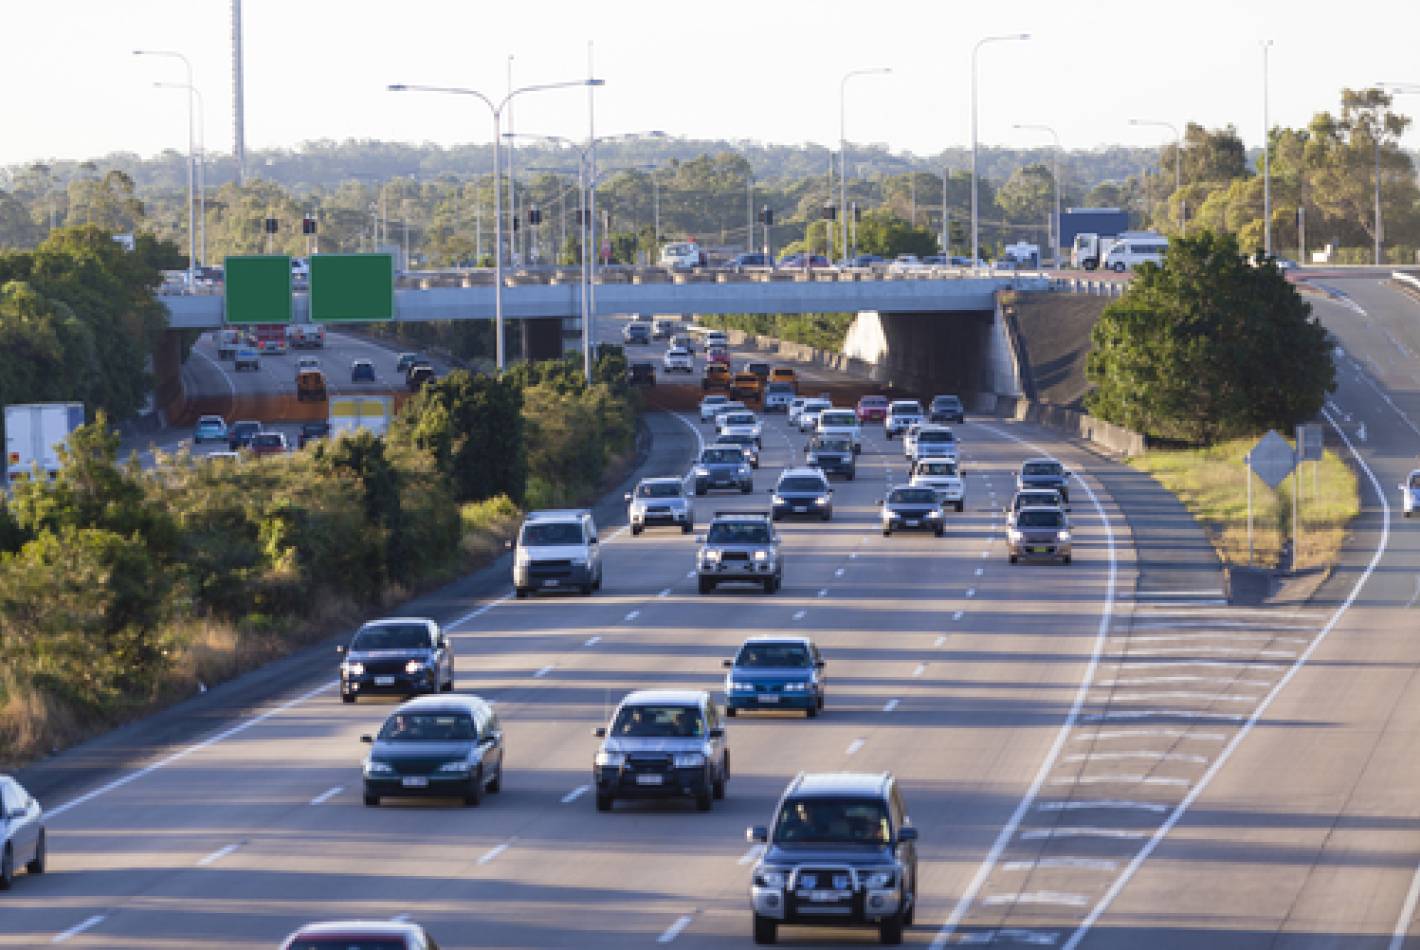 M1 Pacific Motorway - Extension to Raymond Terrace